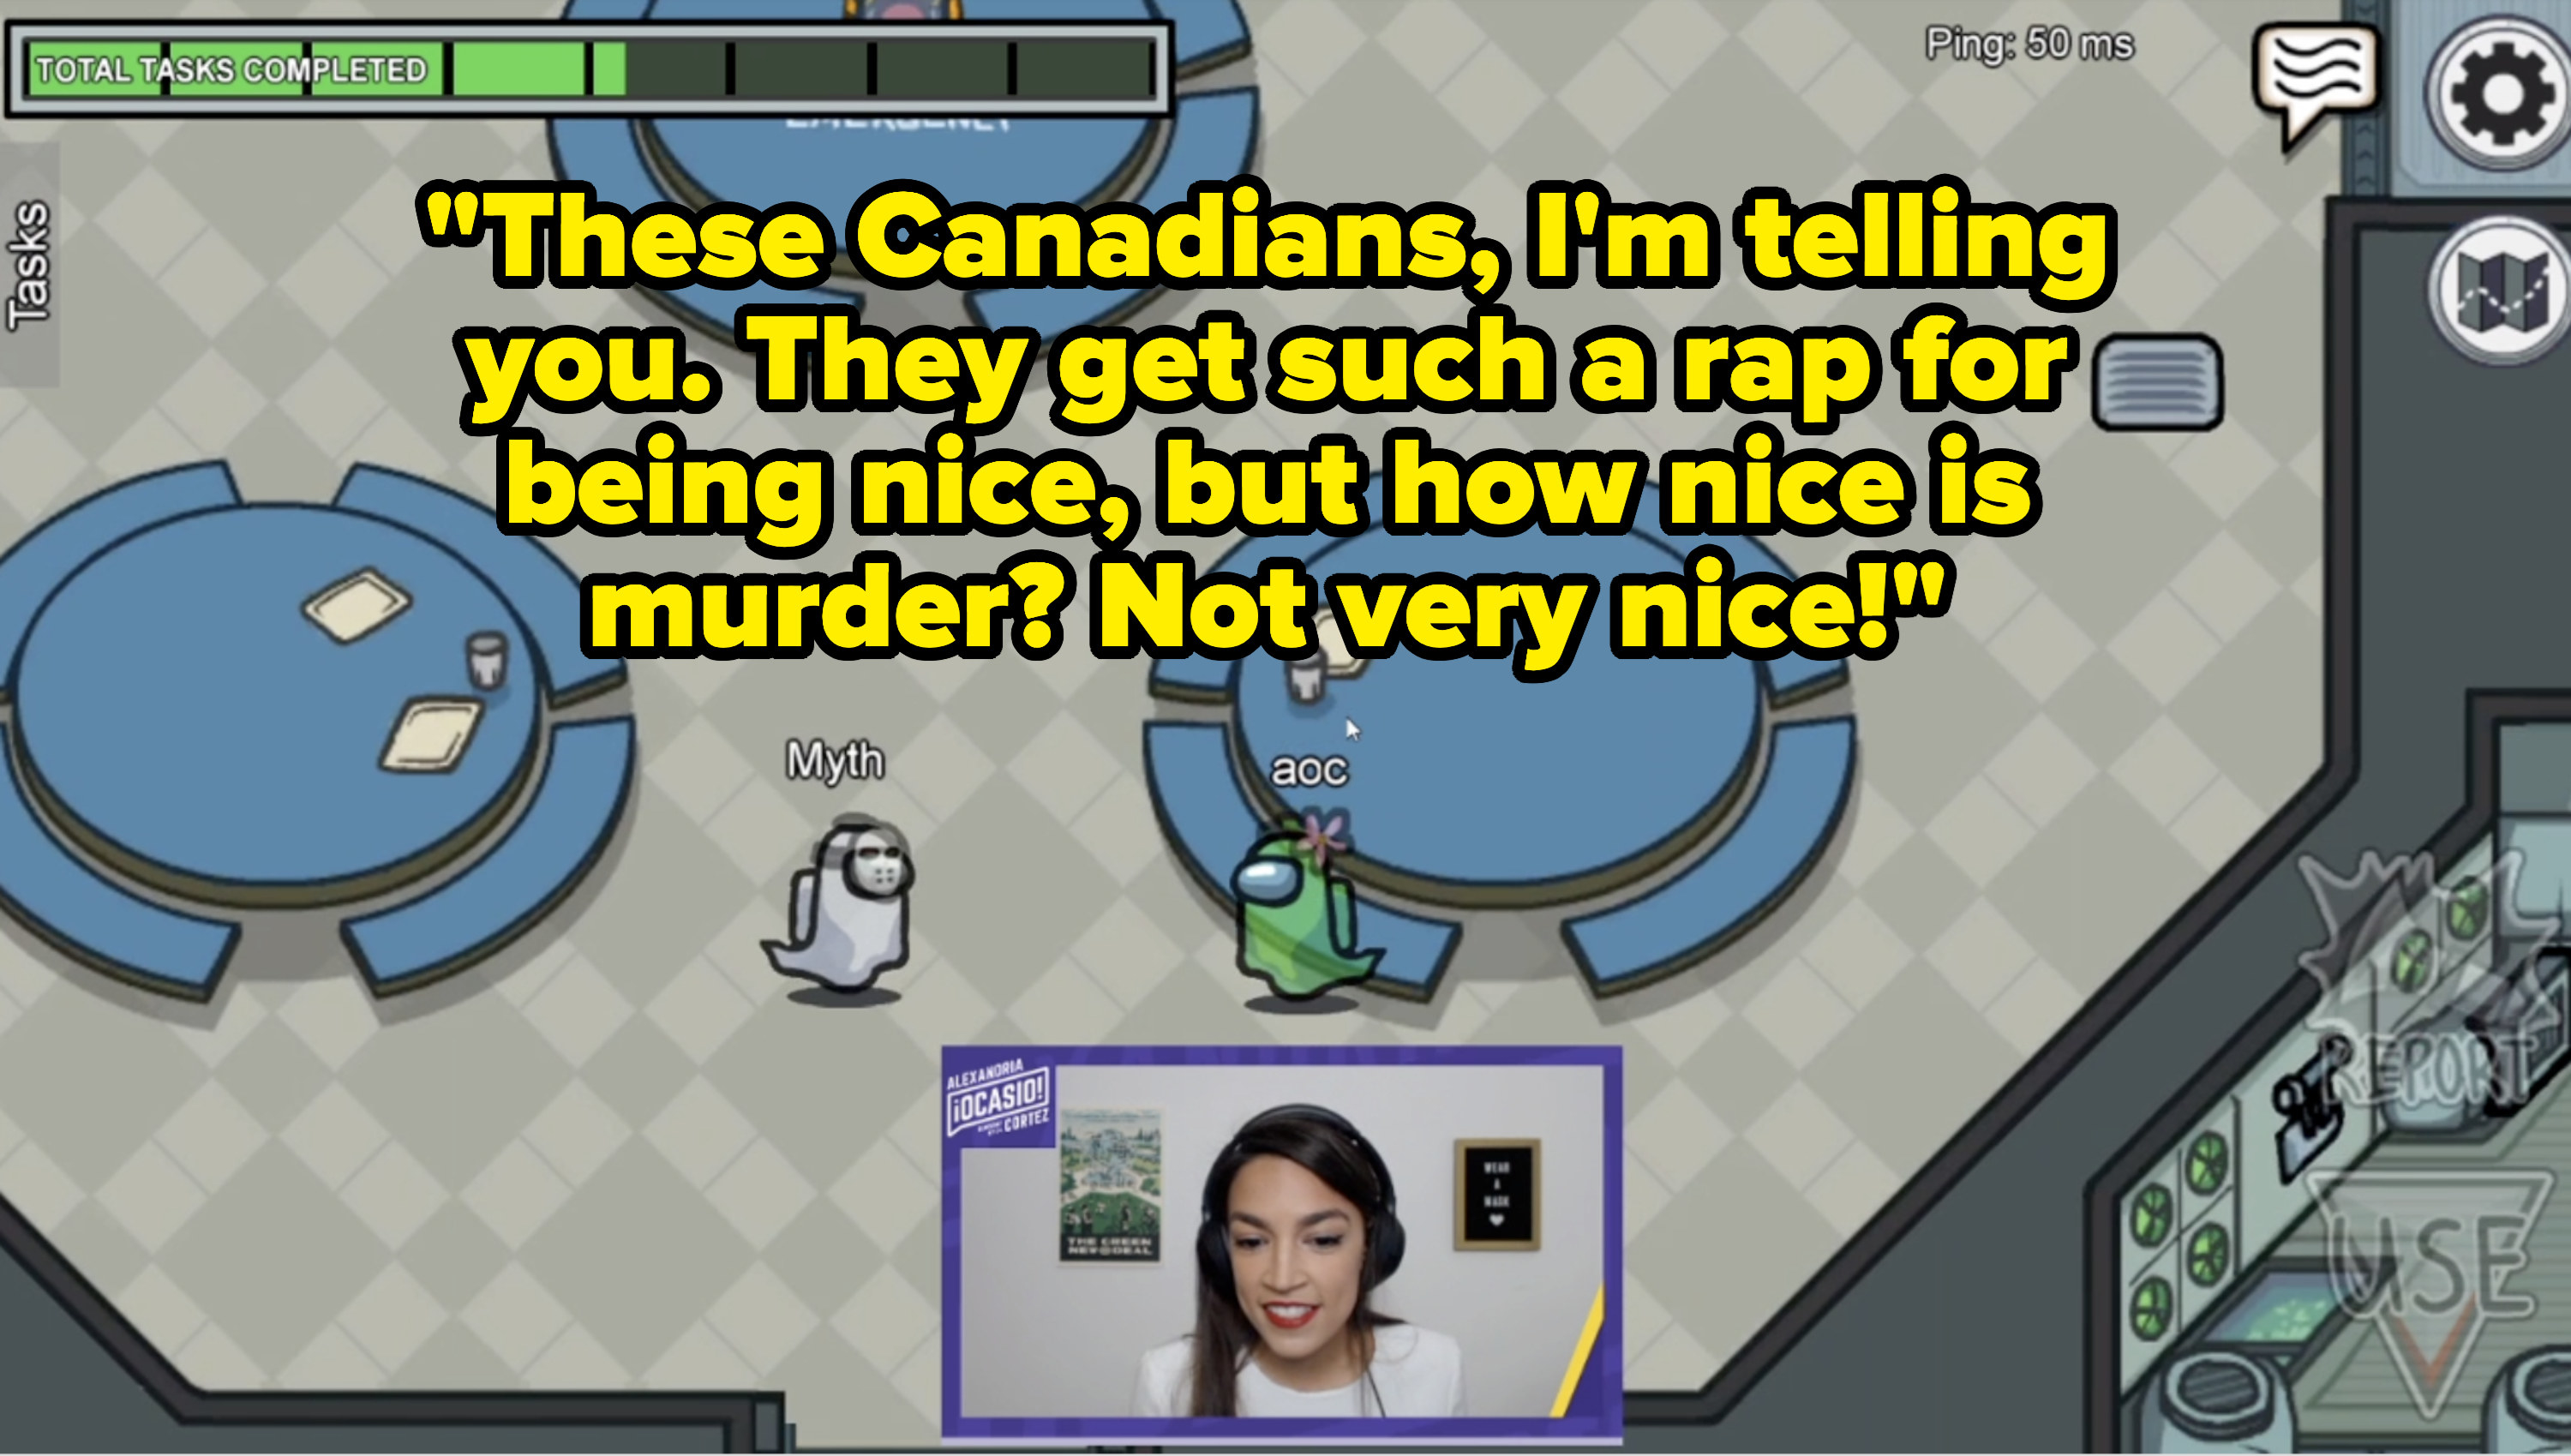 AOC in frame calling out Canada 